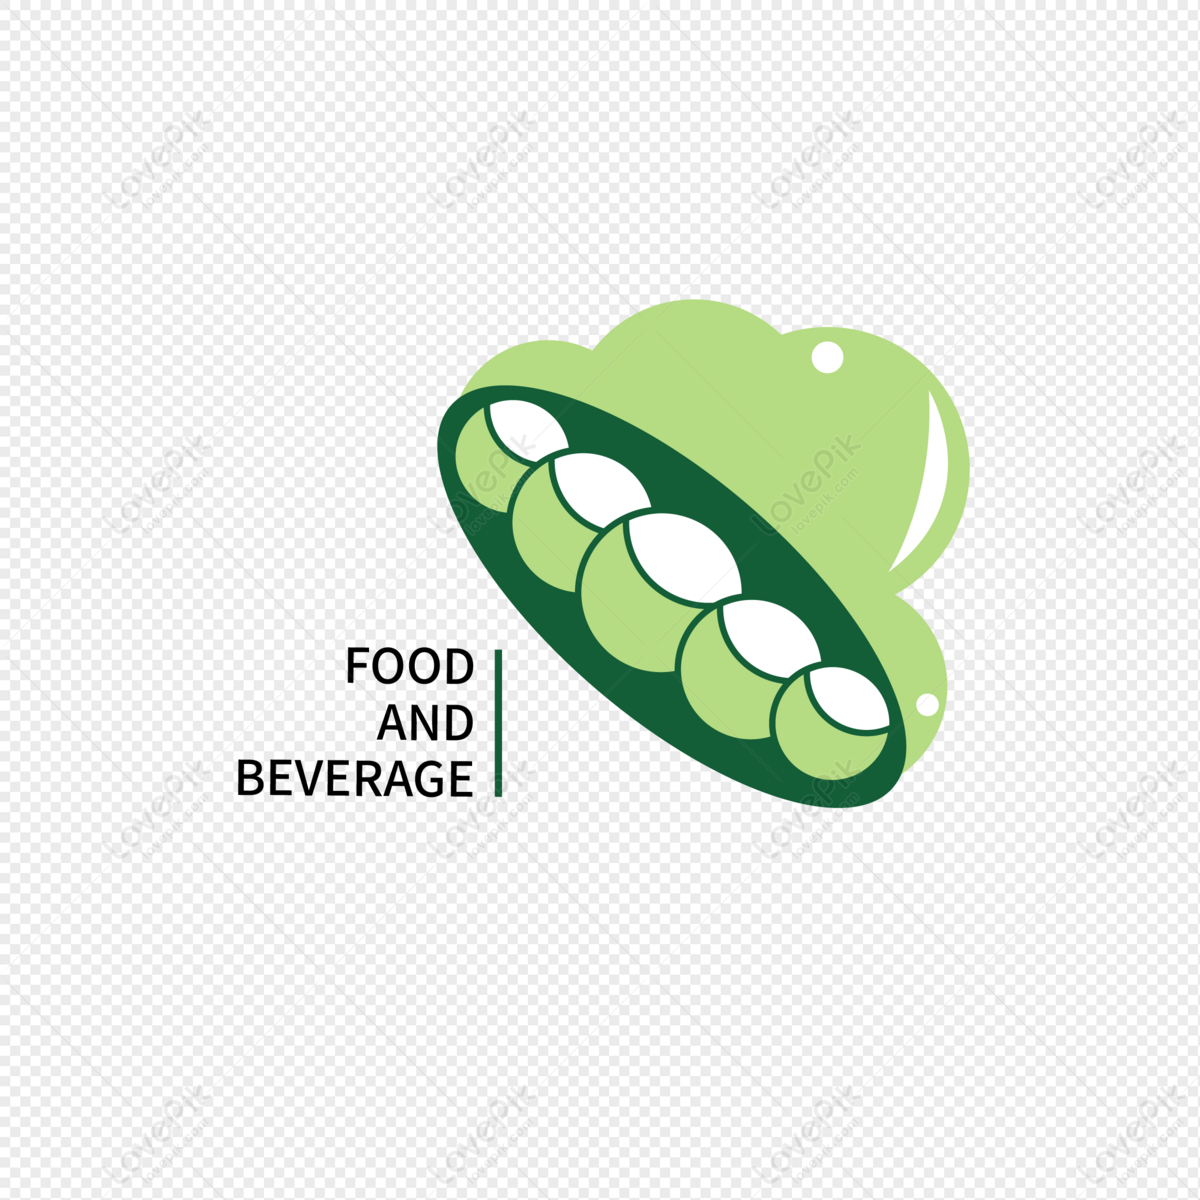 Catering Logo Vector Art PNG, Catering Logo, Logo Clipart, Chef Hat PNG  Image For Free Download | Catering logo, Vector logo, Logo clipart